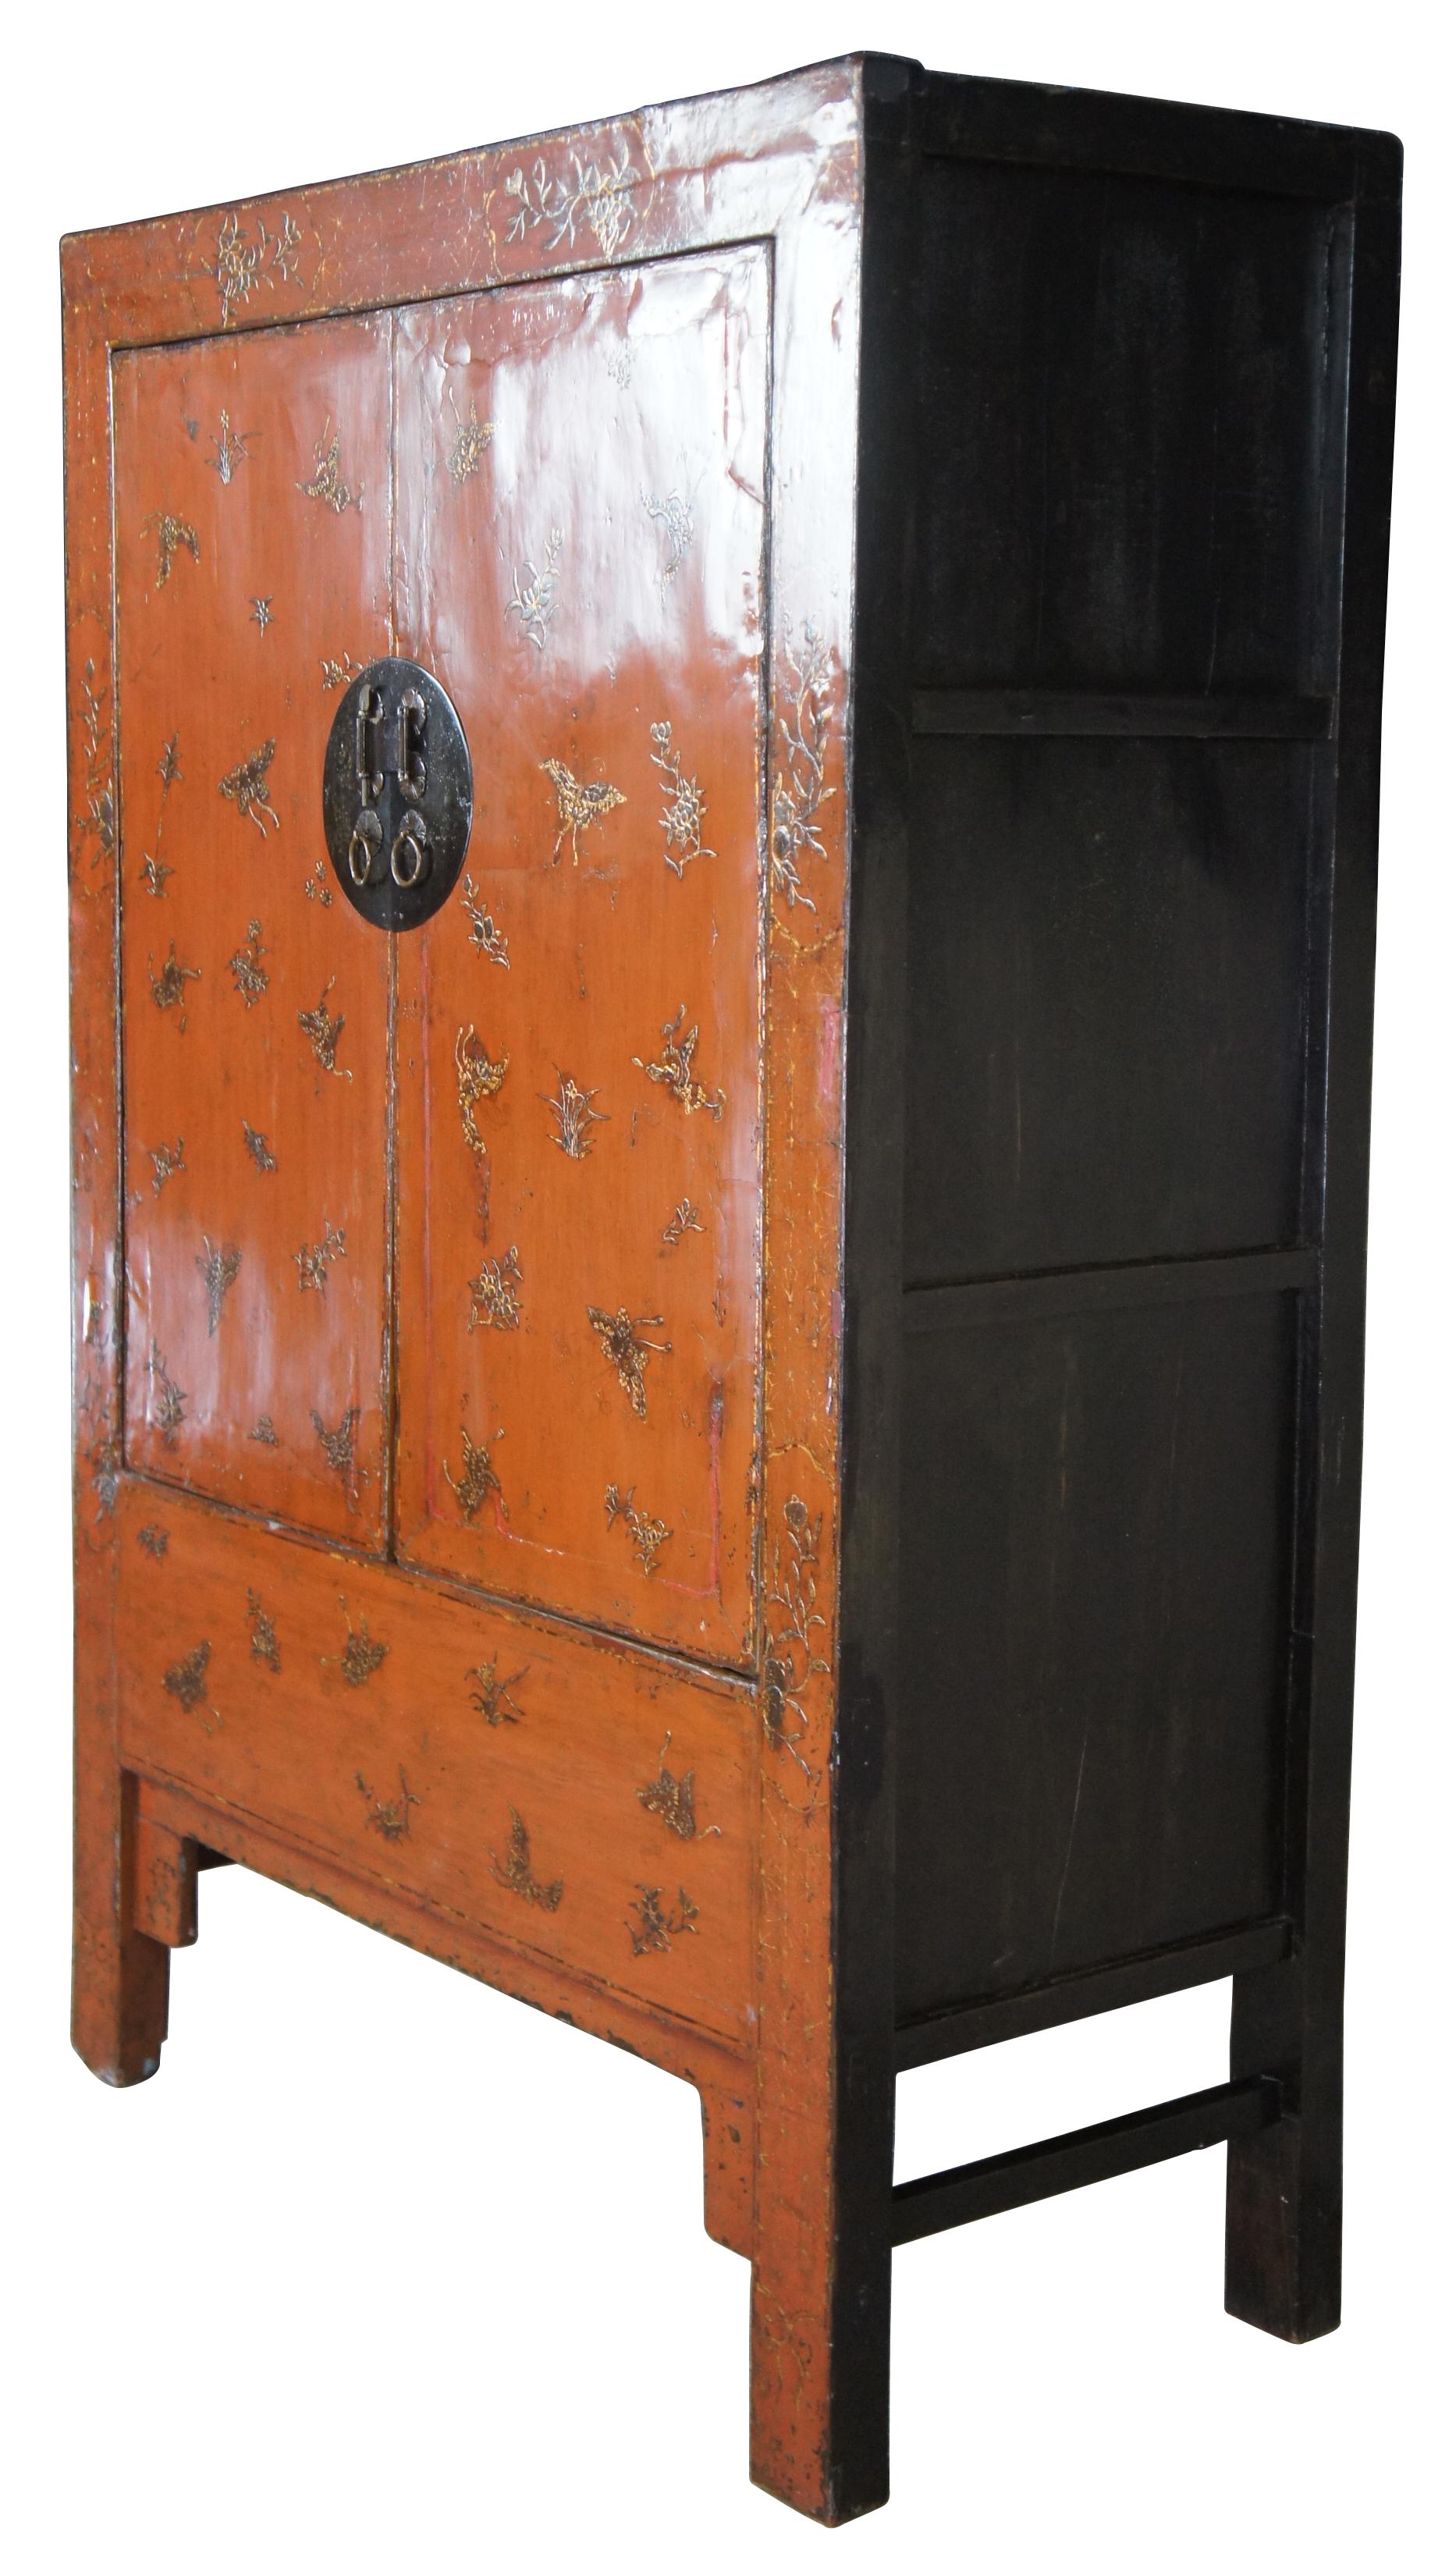 Antique 19th century Qing dynasty wedding cabinet. Made from elm with red lacquer finish over dragonfly / butterfly motif. Features two shelves and hidden interior compartment.
 